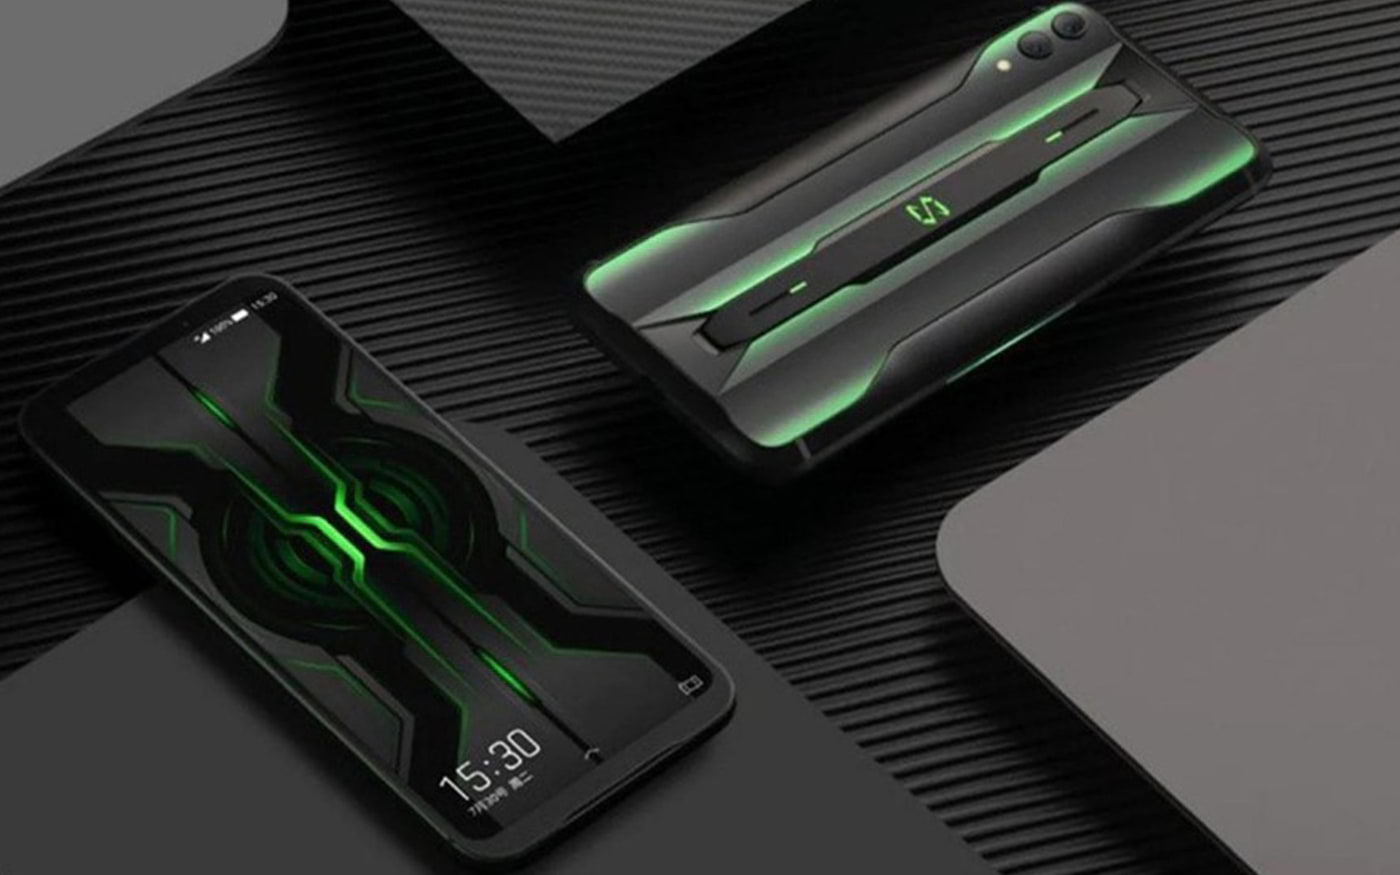 Xiaomi Black Shark 3 will be made official on March 3